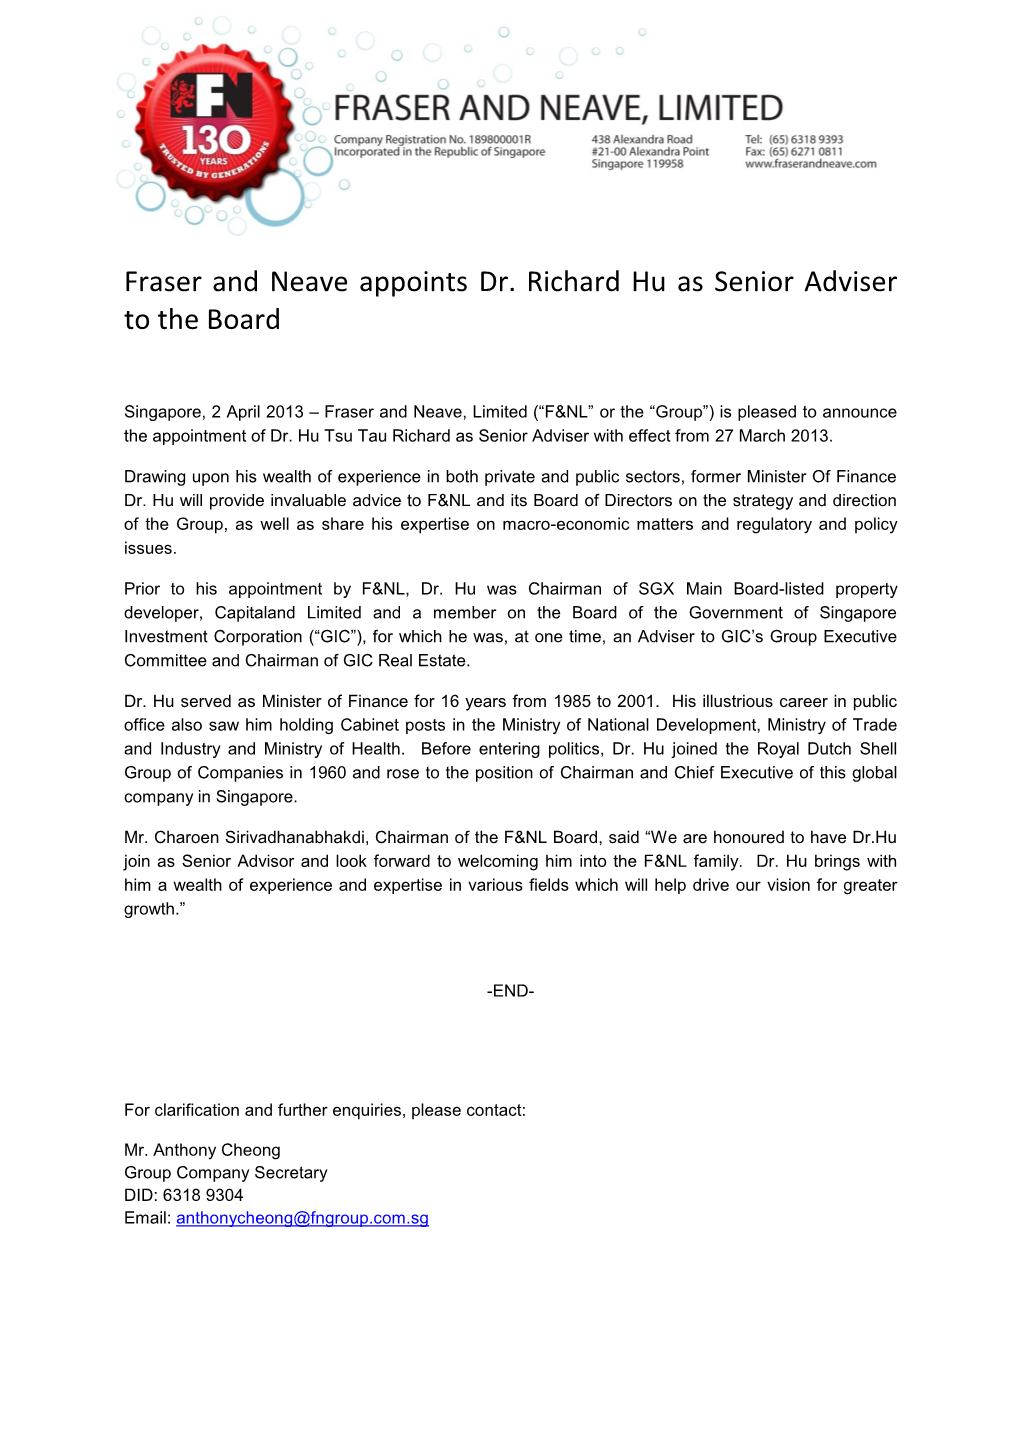 Fraser and Neave Appoints Dr. Richard Hu As Senior Adviser to the Board